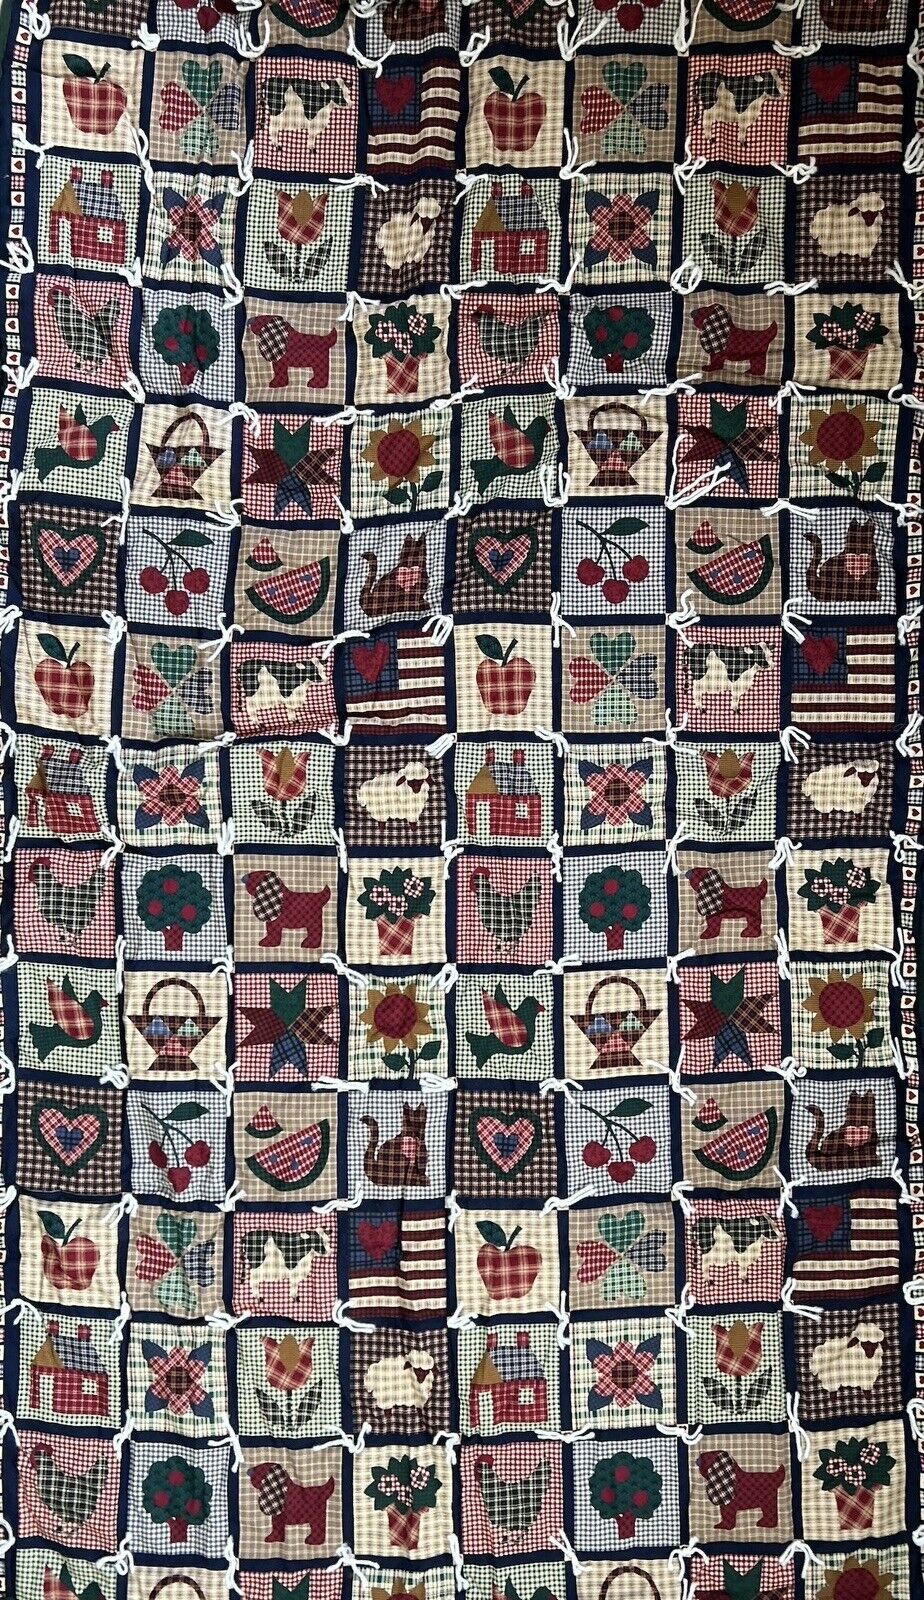 VINTAGE Hand Tied HAND STITCHED Patchwork Americana Quilt 70x41 & Pillowcase Set